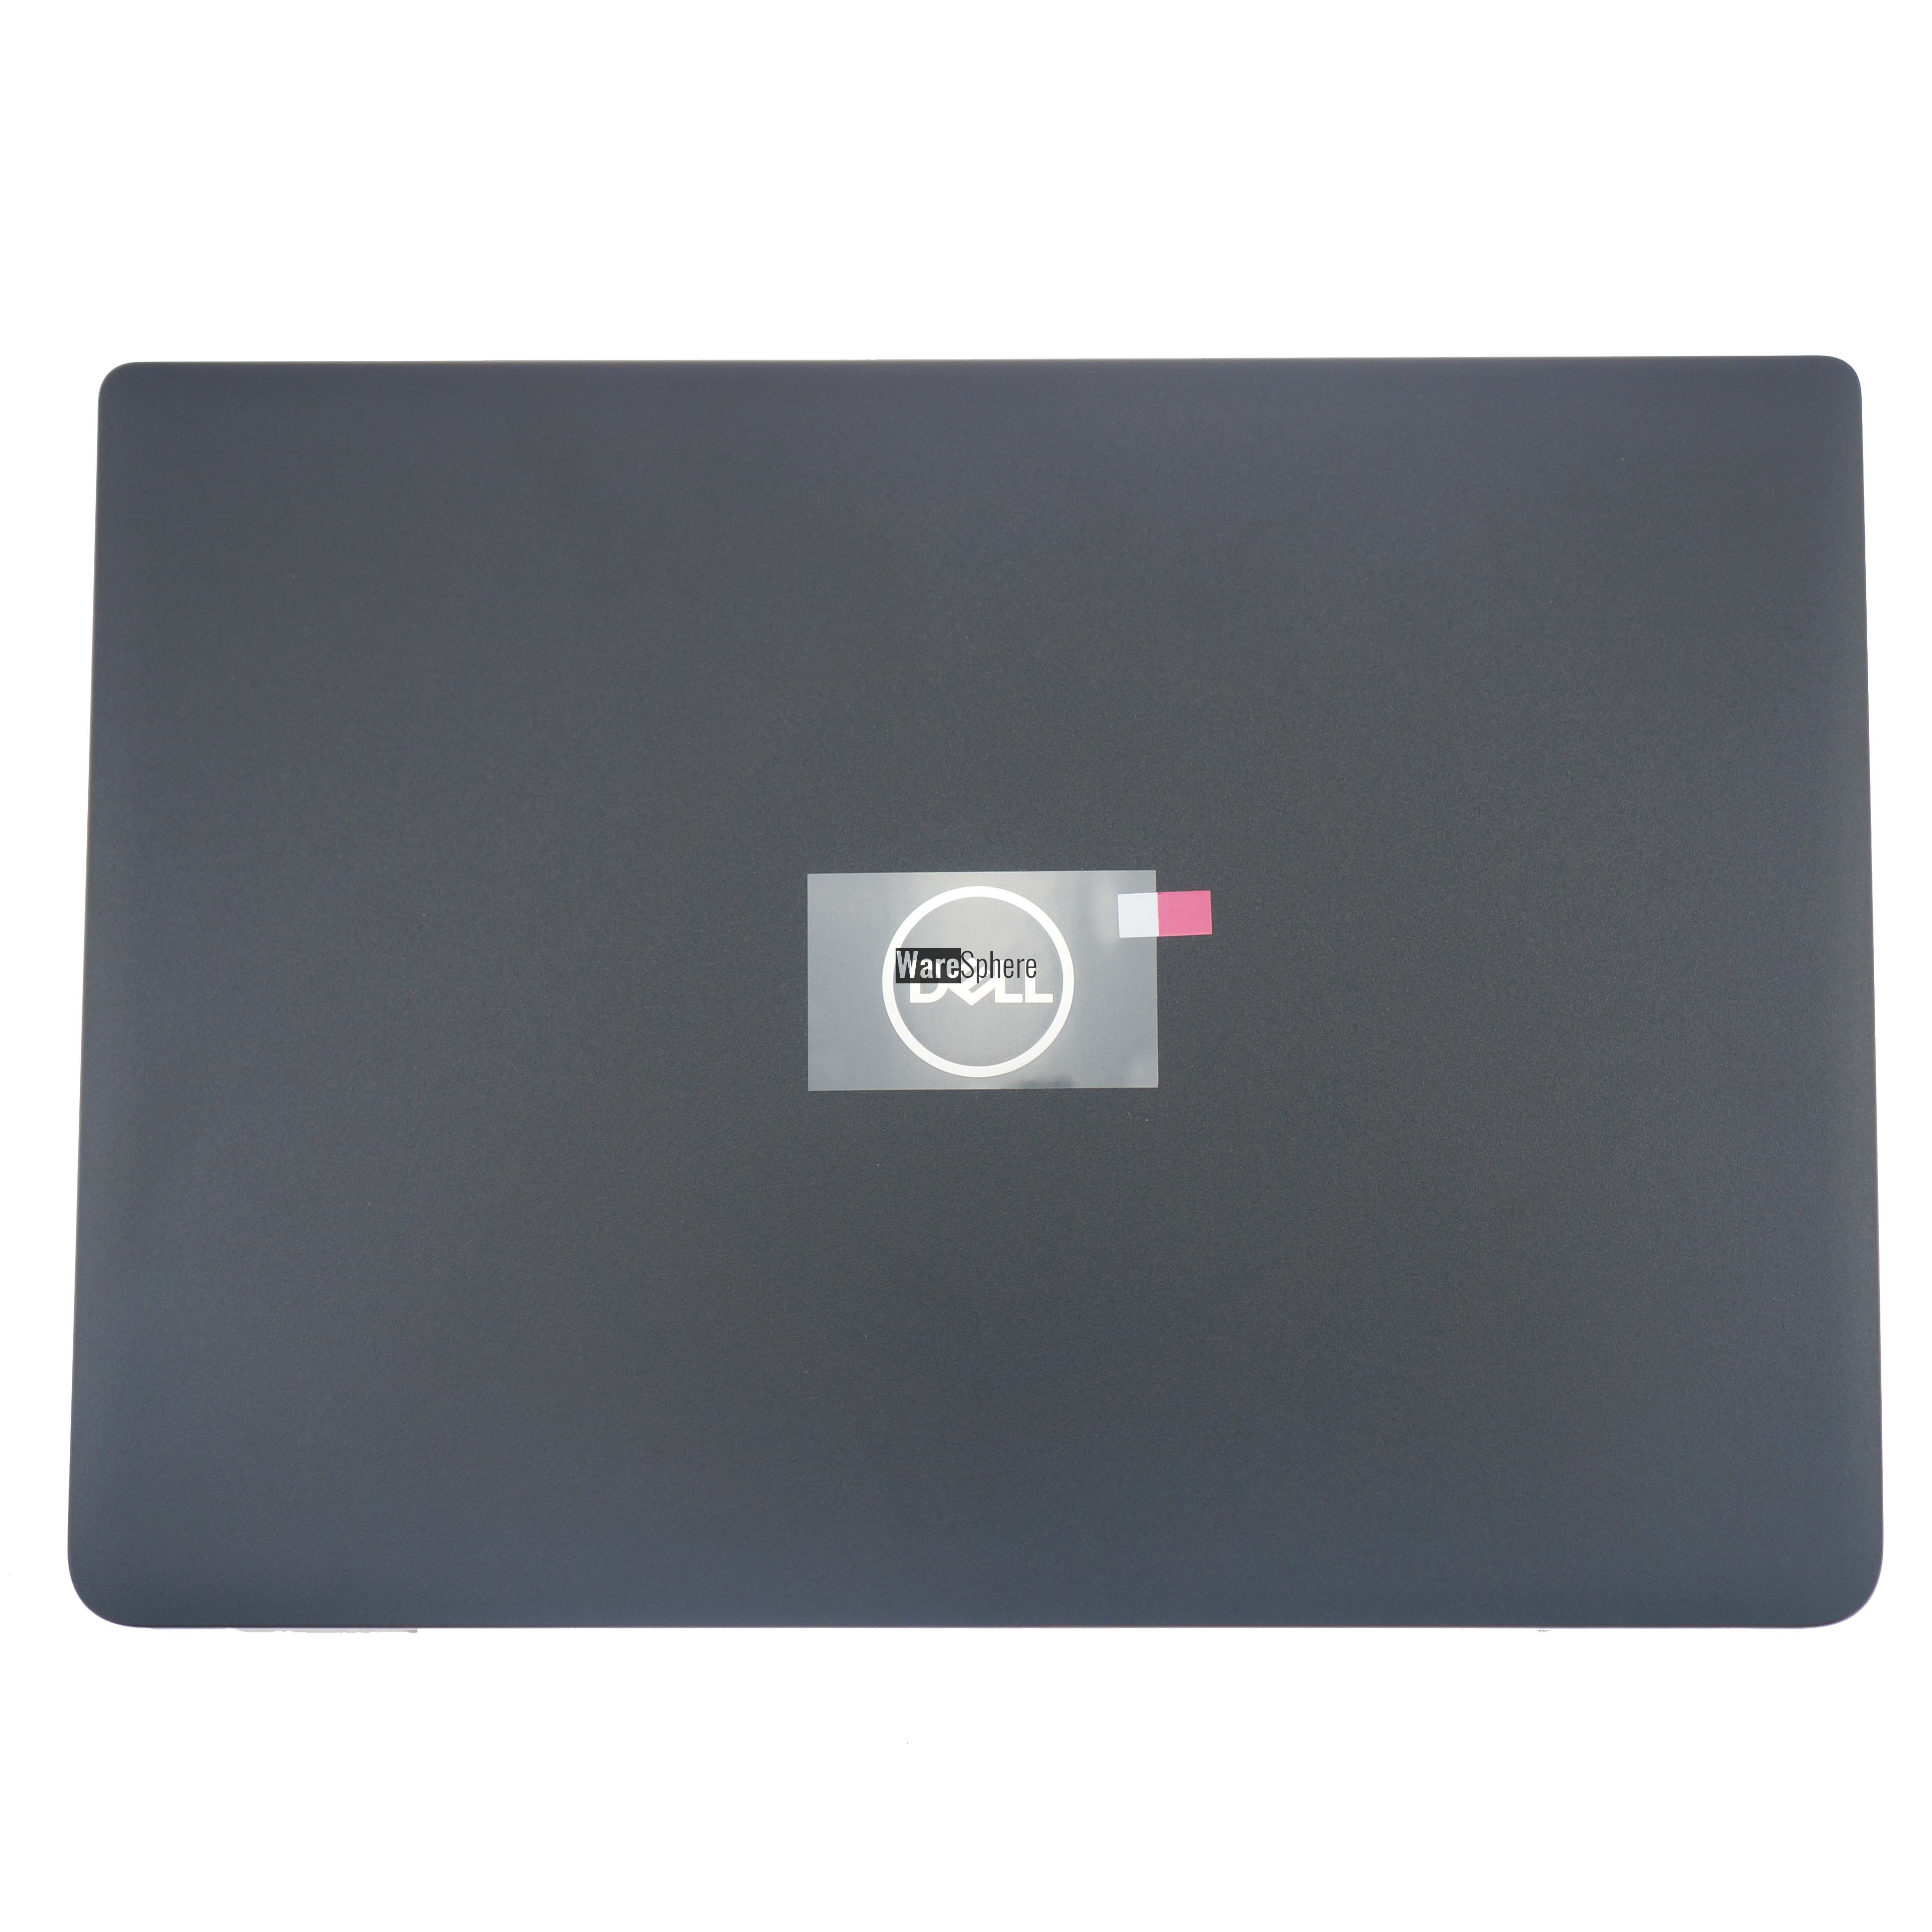 LCD Back Cover for Dell Latitude 3400 E3400 0H02YK H02YK Black